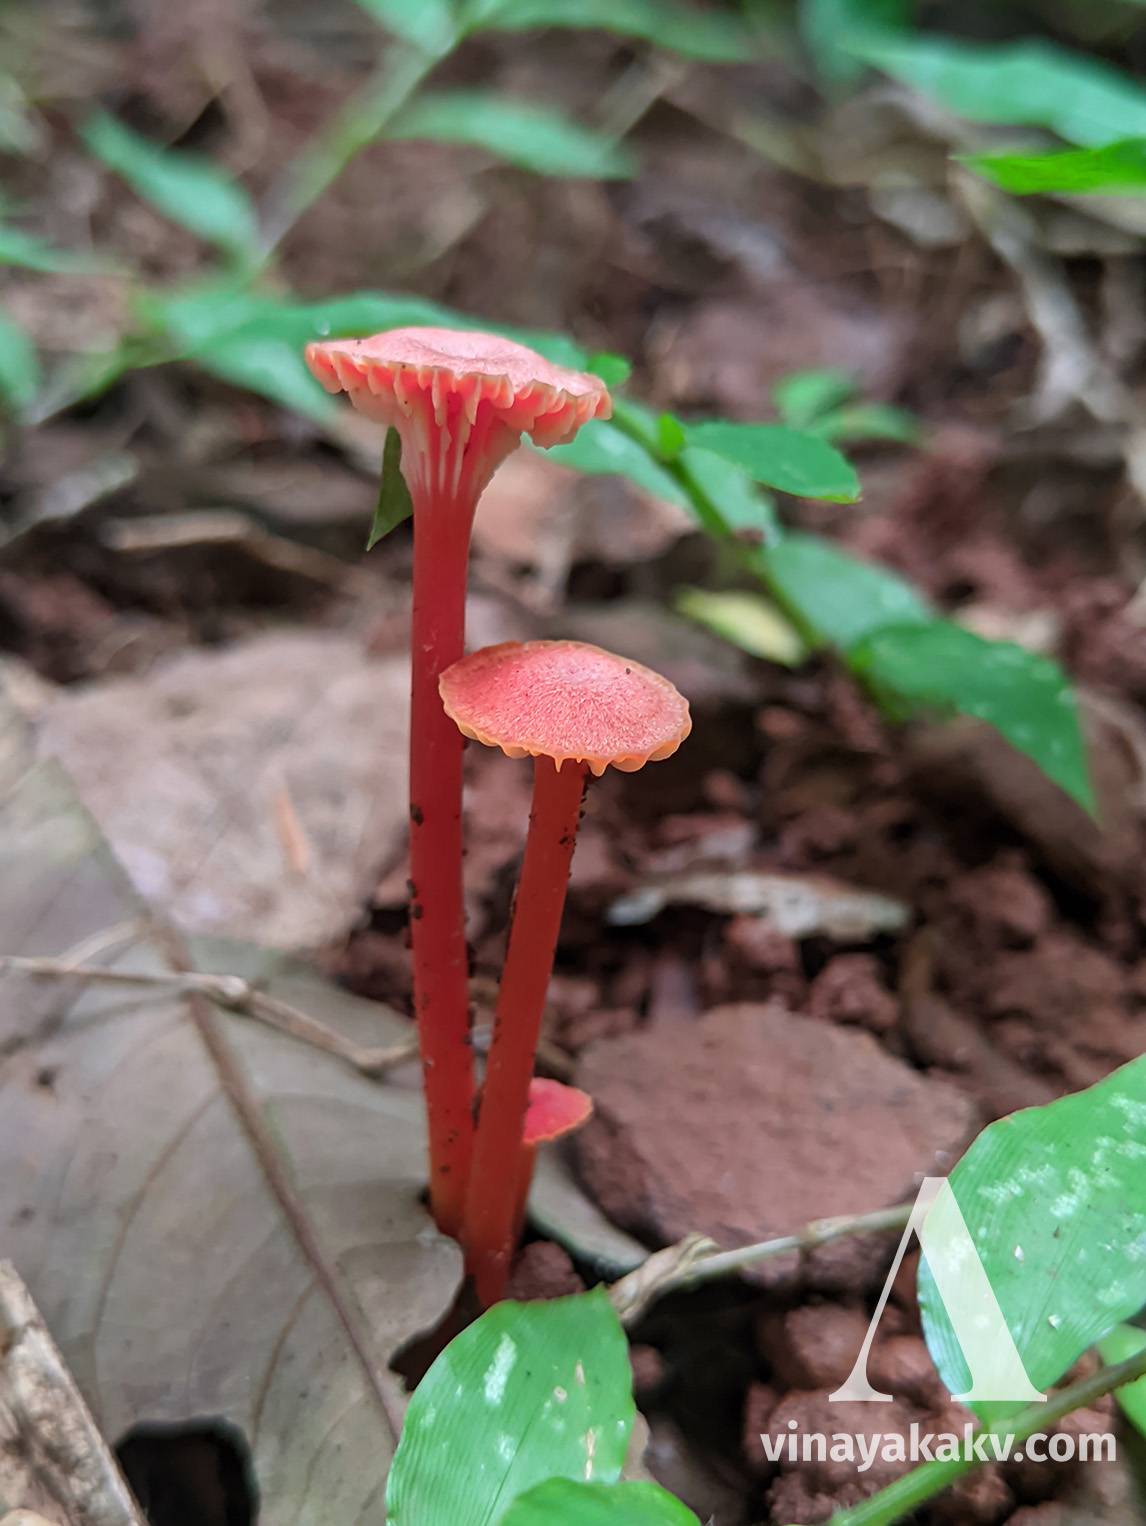 Tiny, red fungi on a forest floor